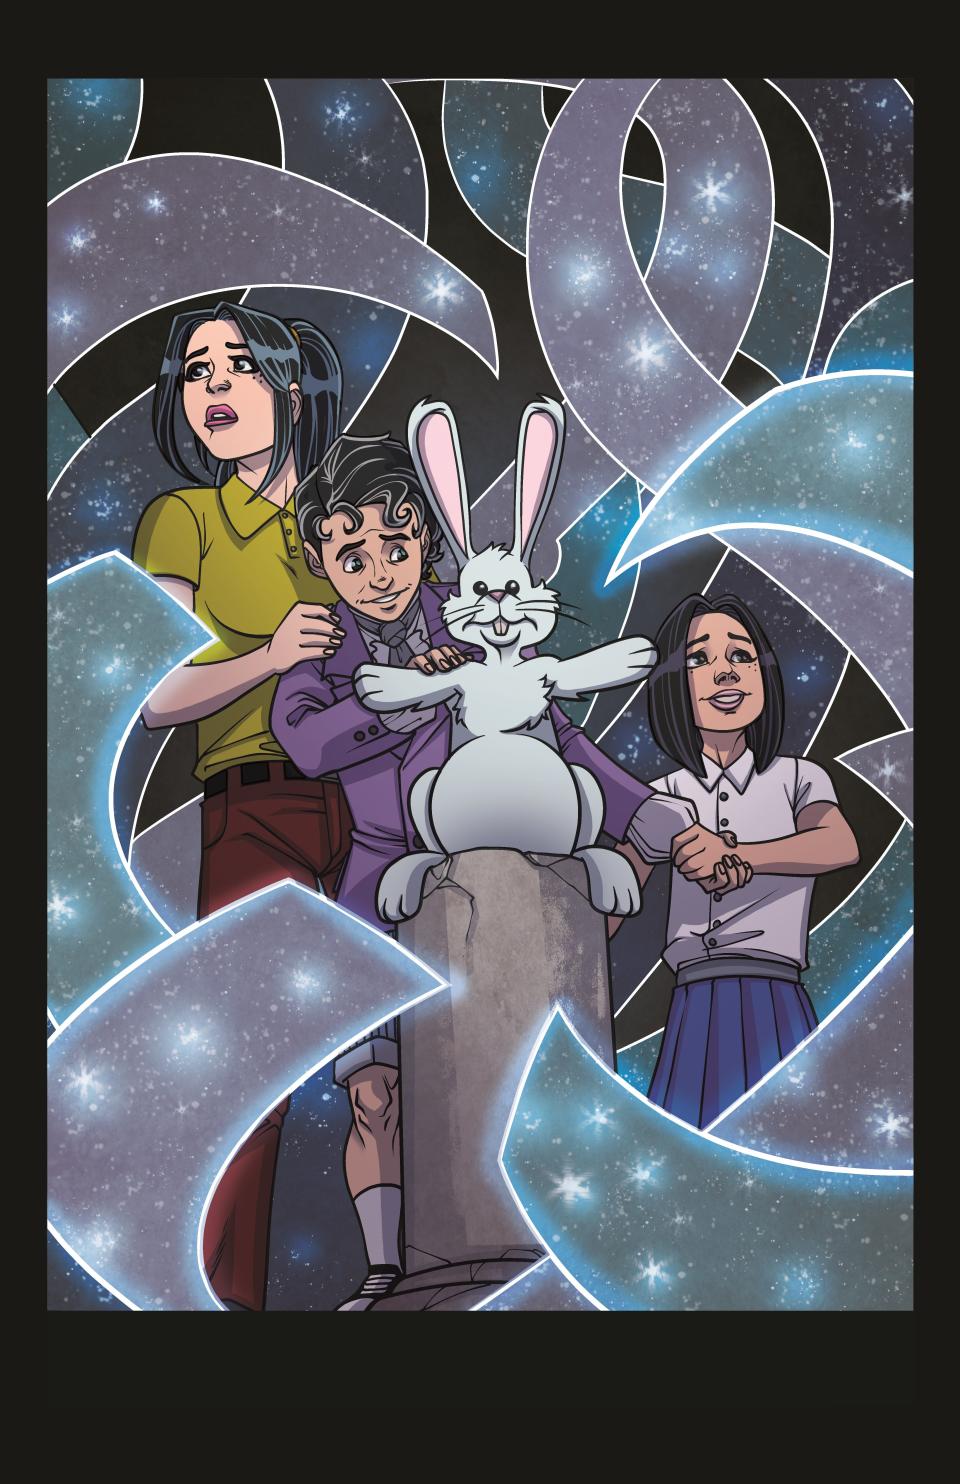 A page from the Scout Comics book "Stabbity Bunny," created by Richard Rivera